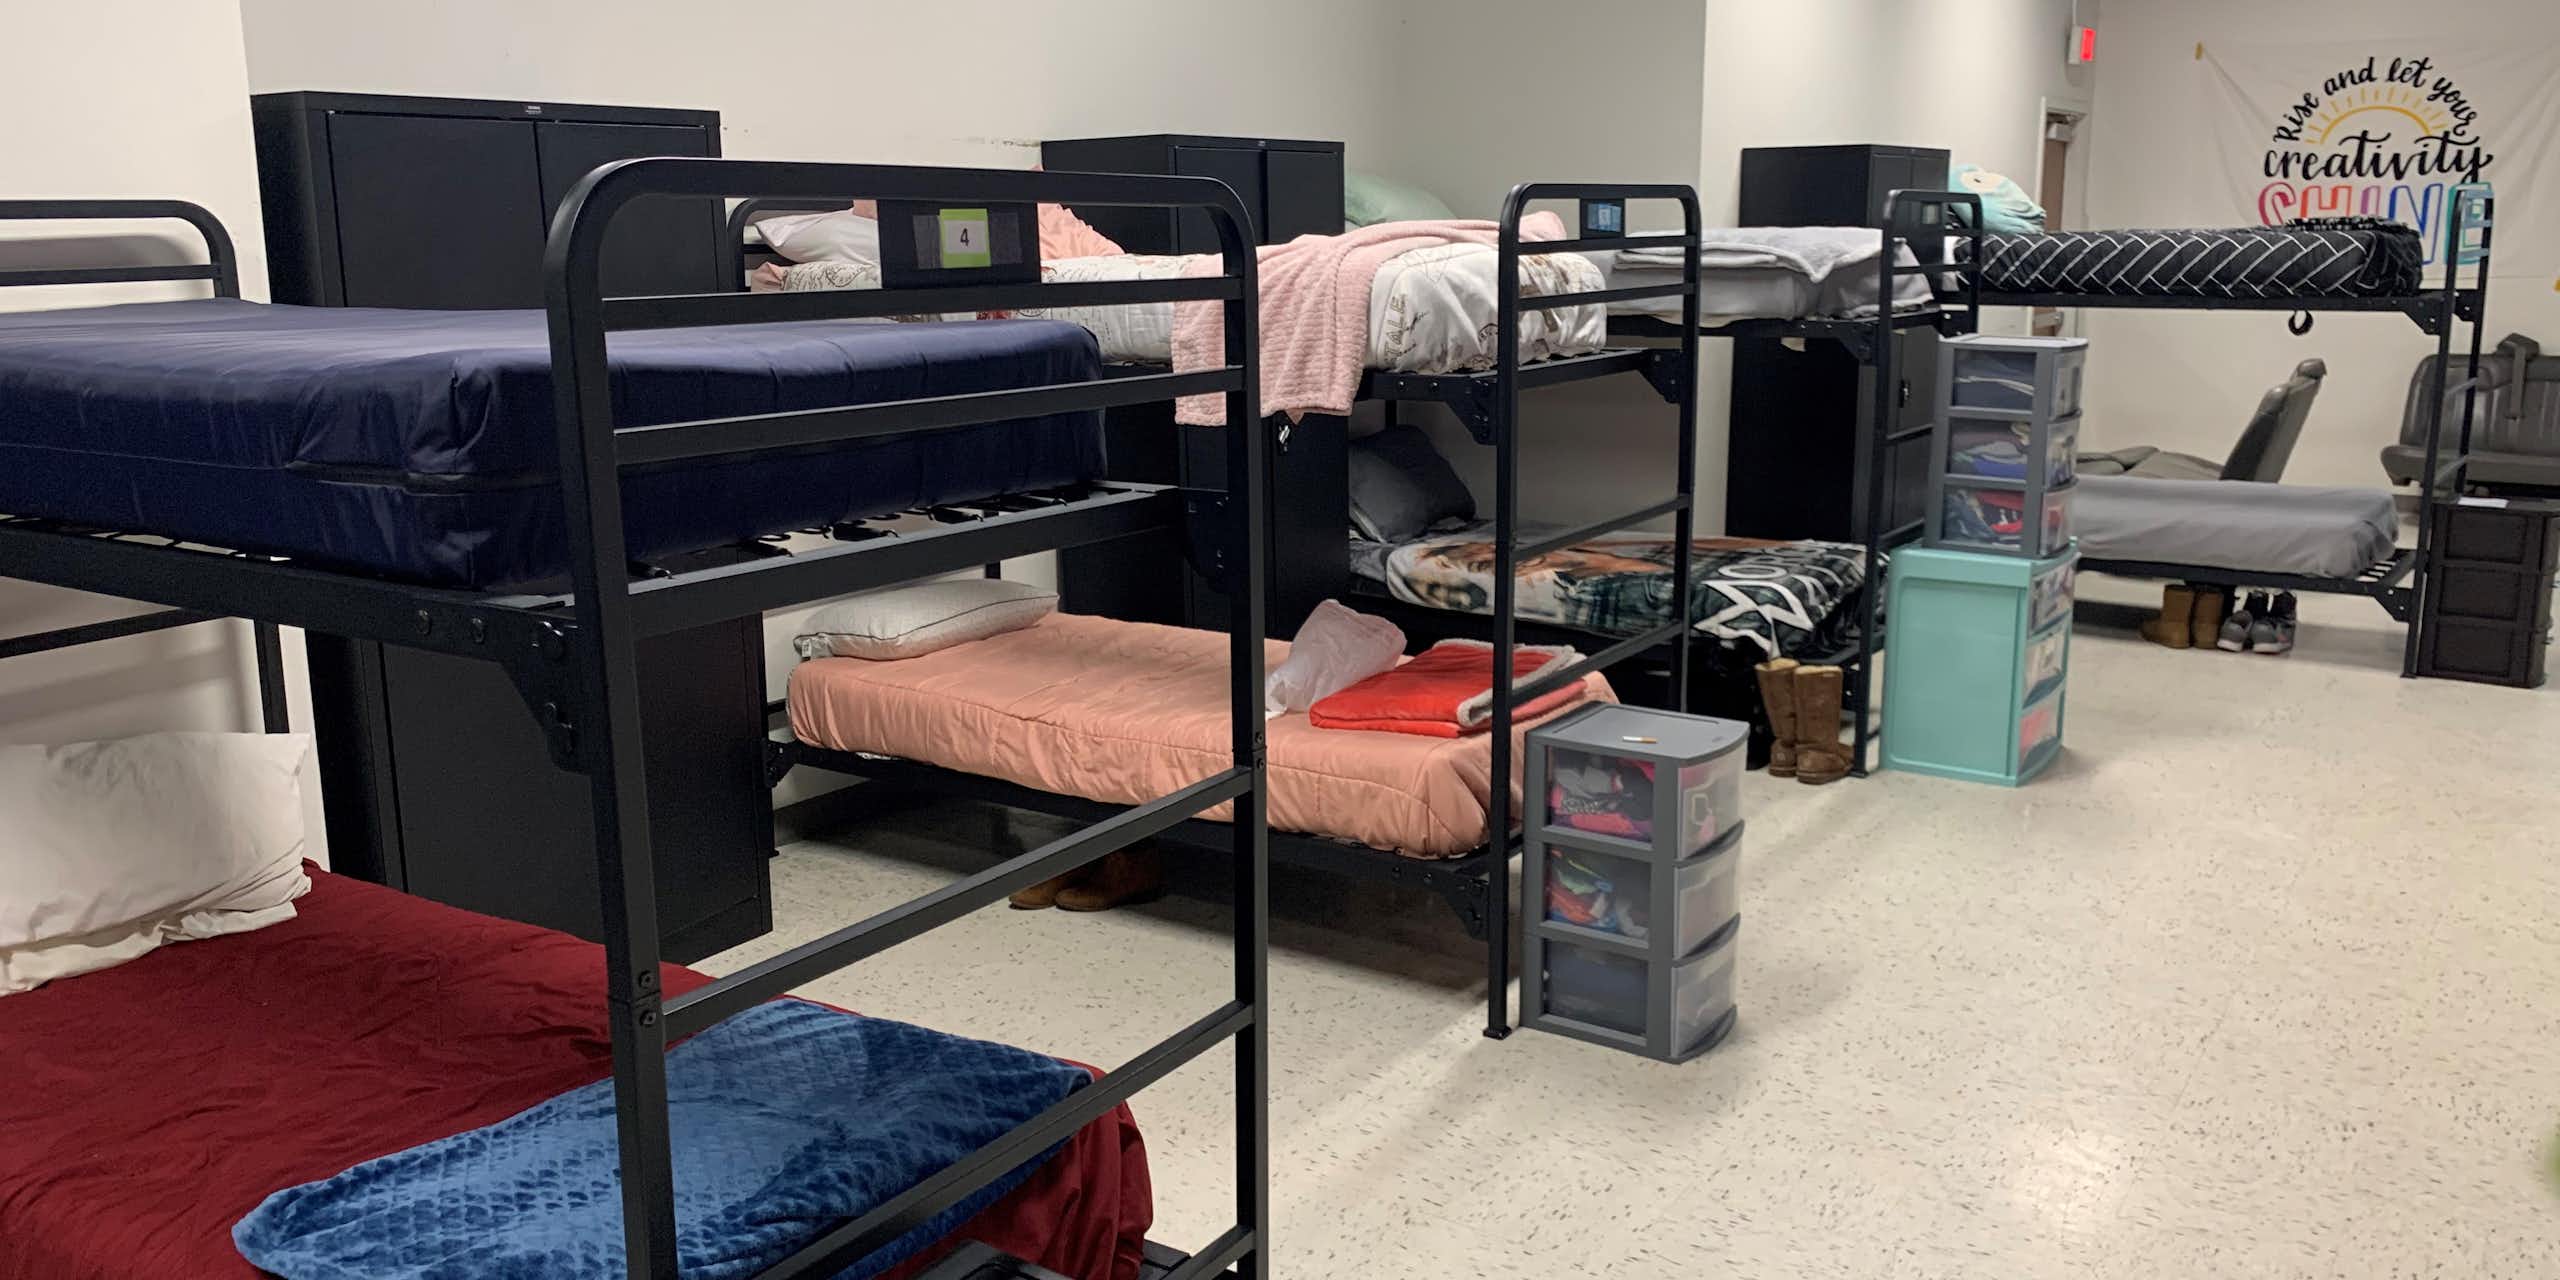 Bunk beds and lockers in a dormitory-style room